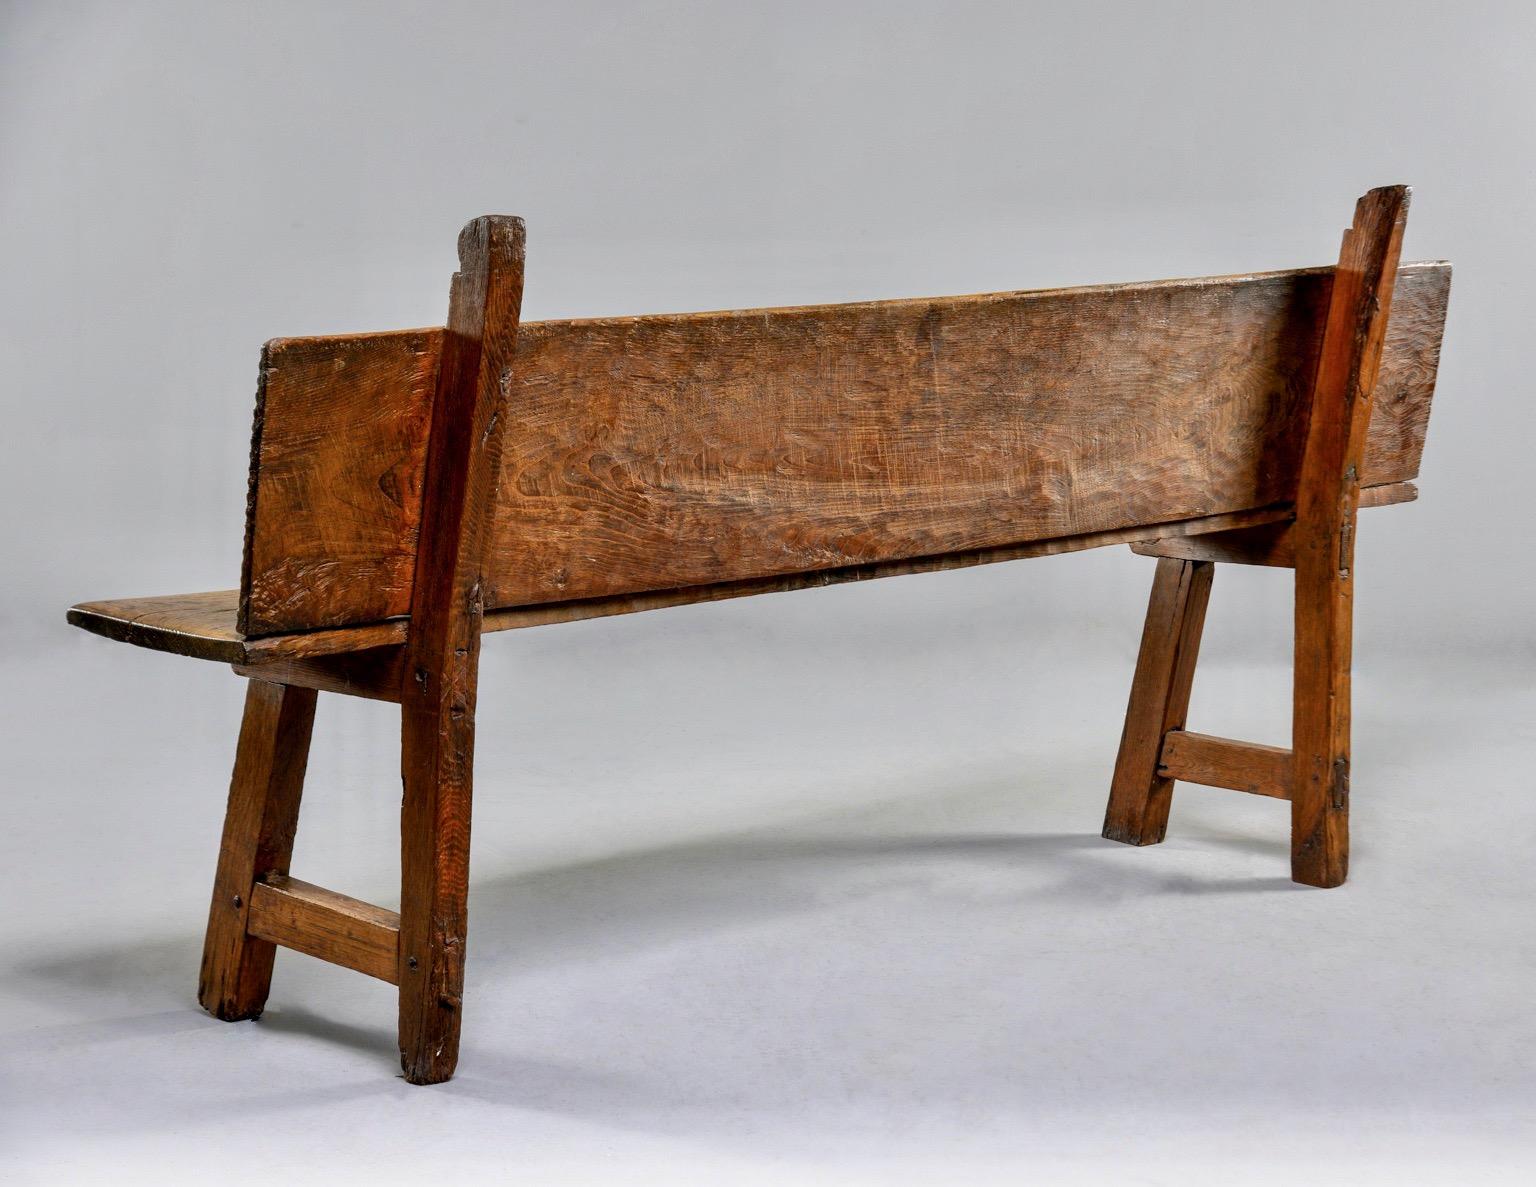 Long rustic chestnut Spanish bench dates from the 1890s. Unknown maker. Measures: Seat is 20.25” high and 13” deep.